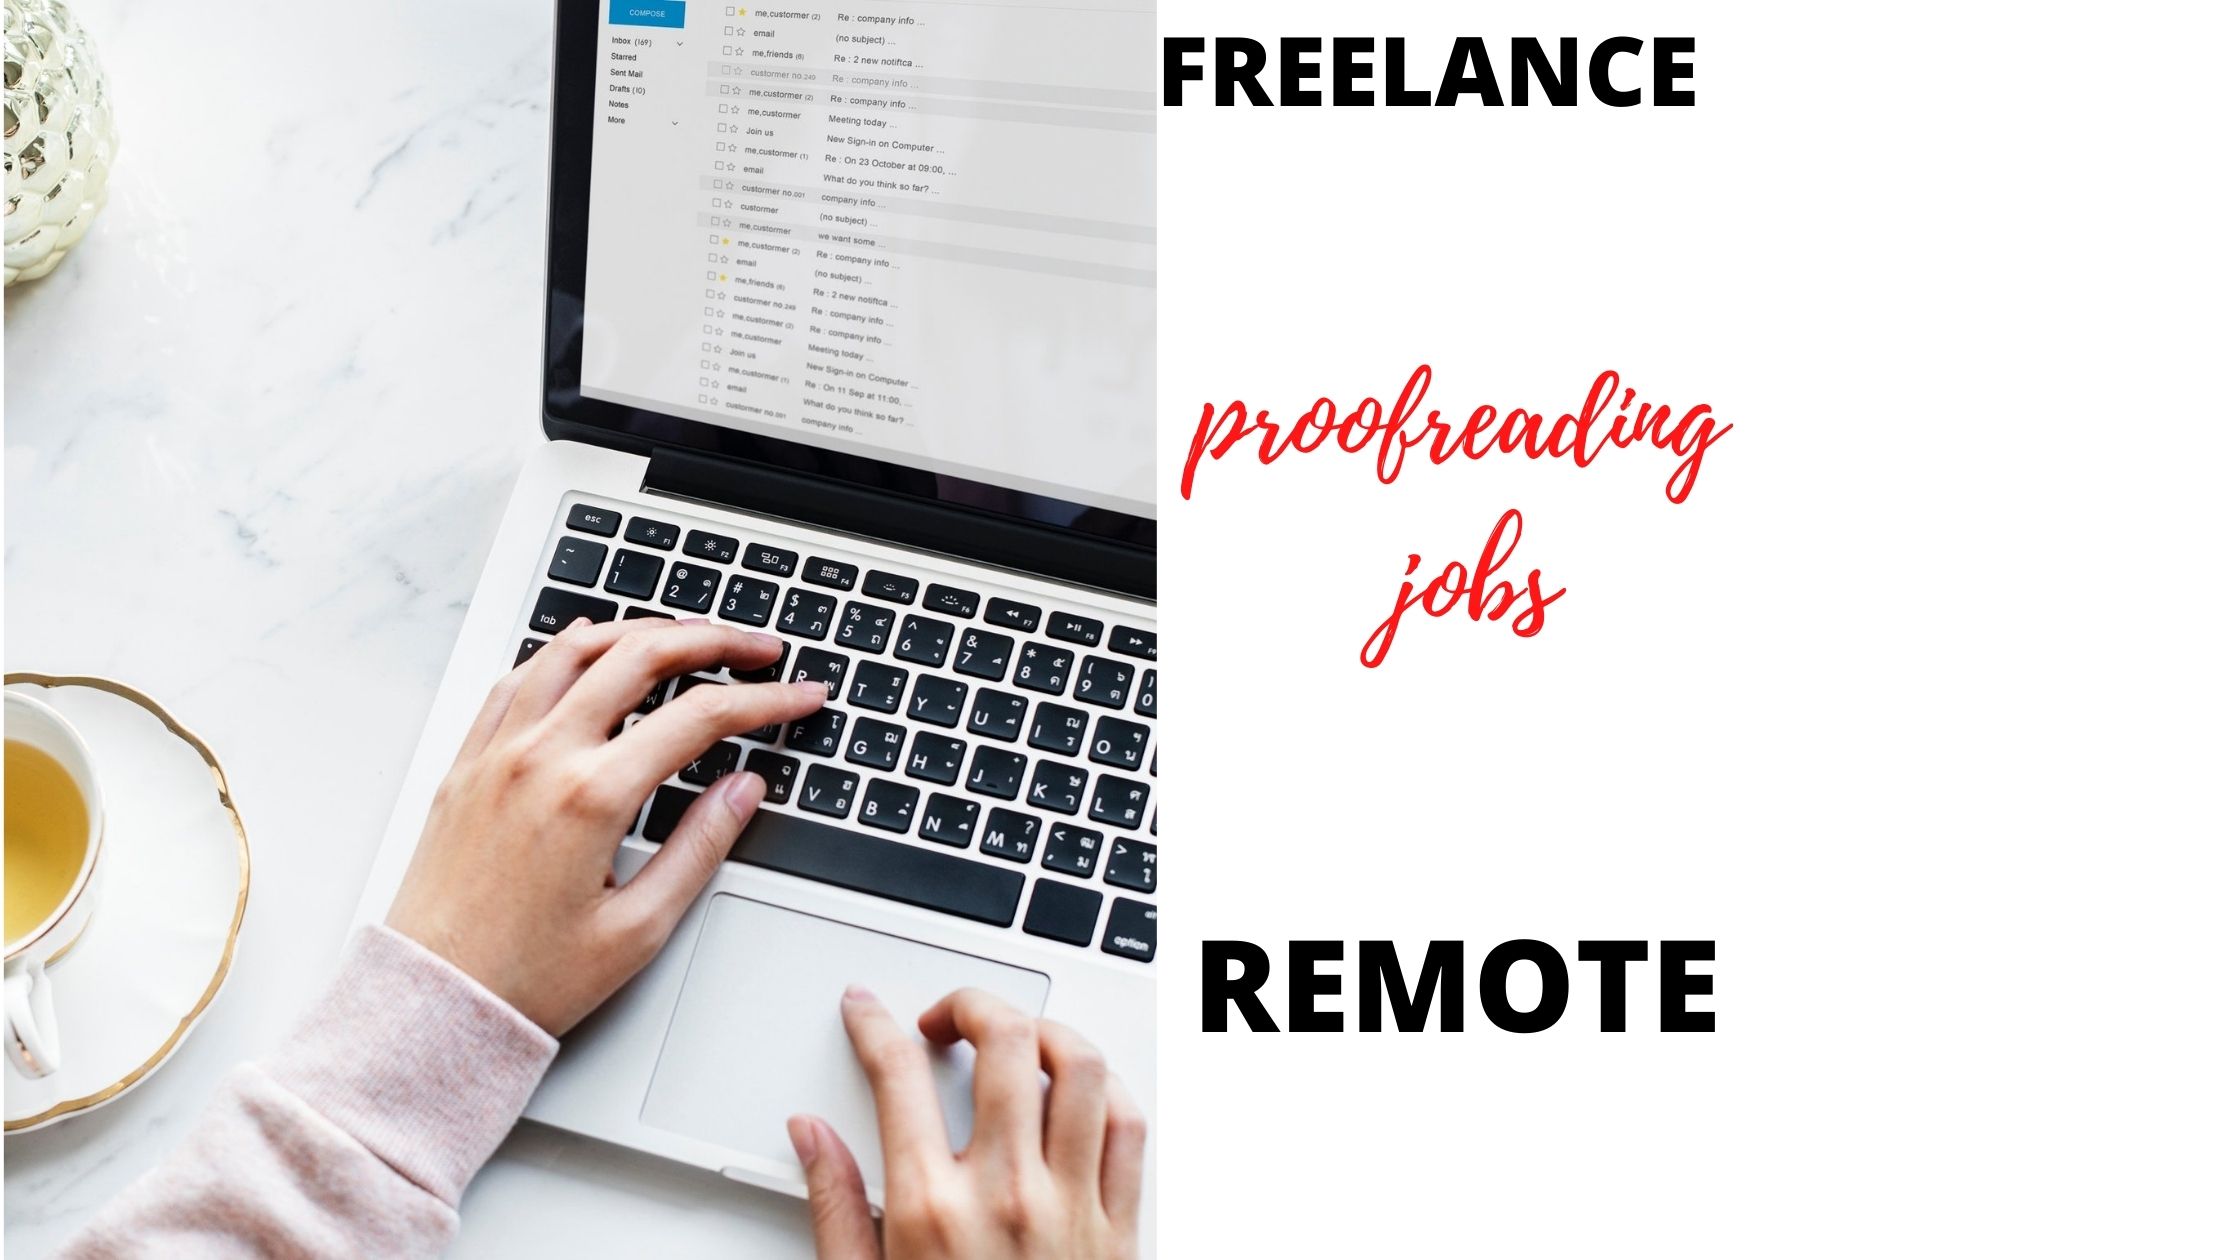 Get paid to proofread at home